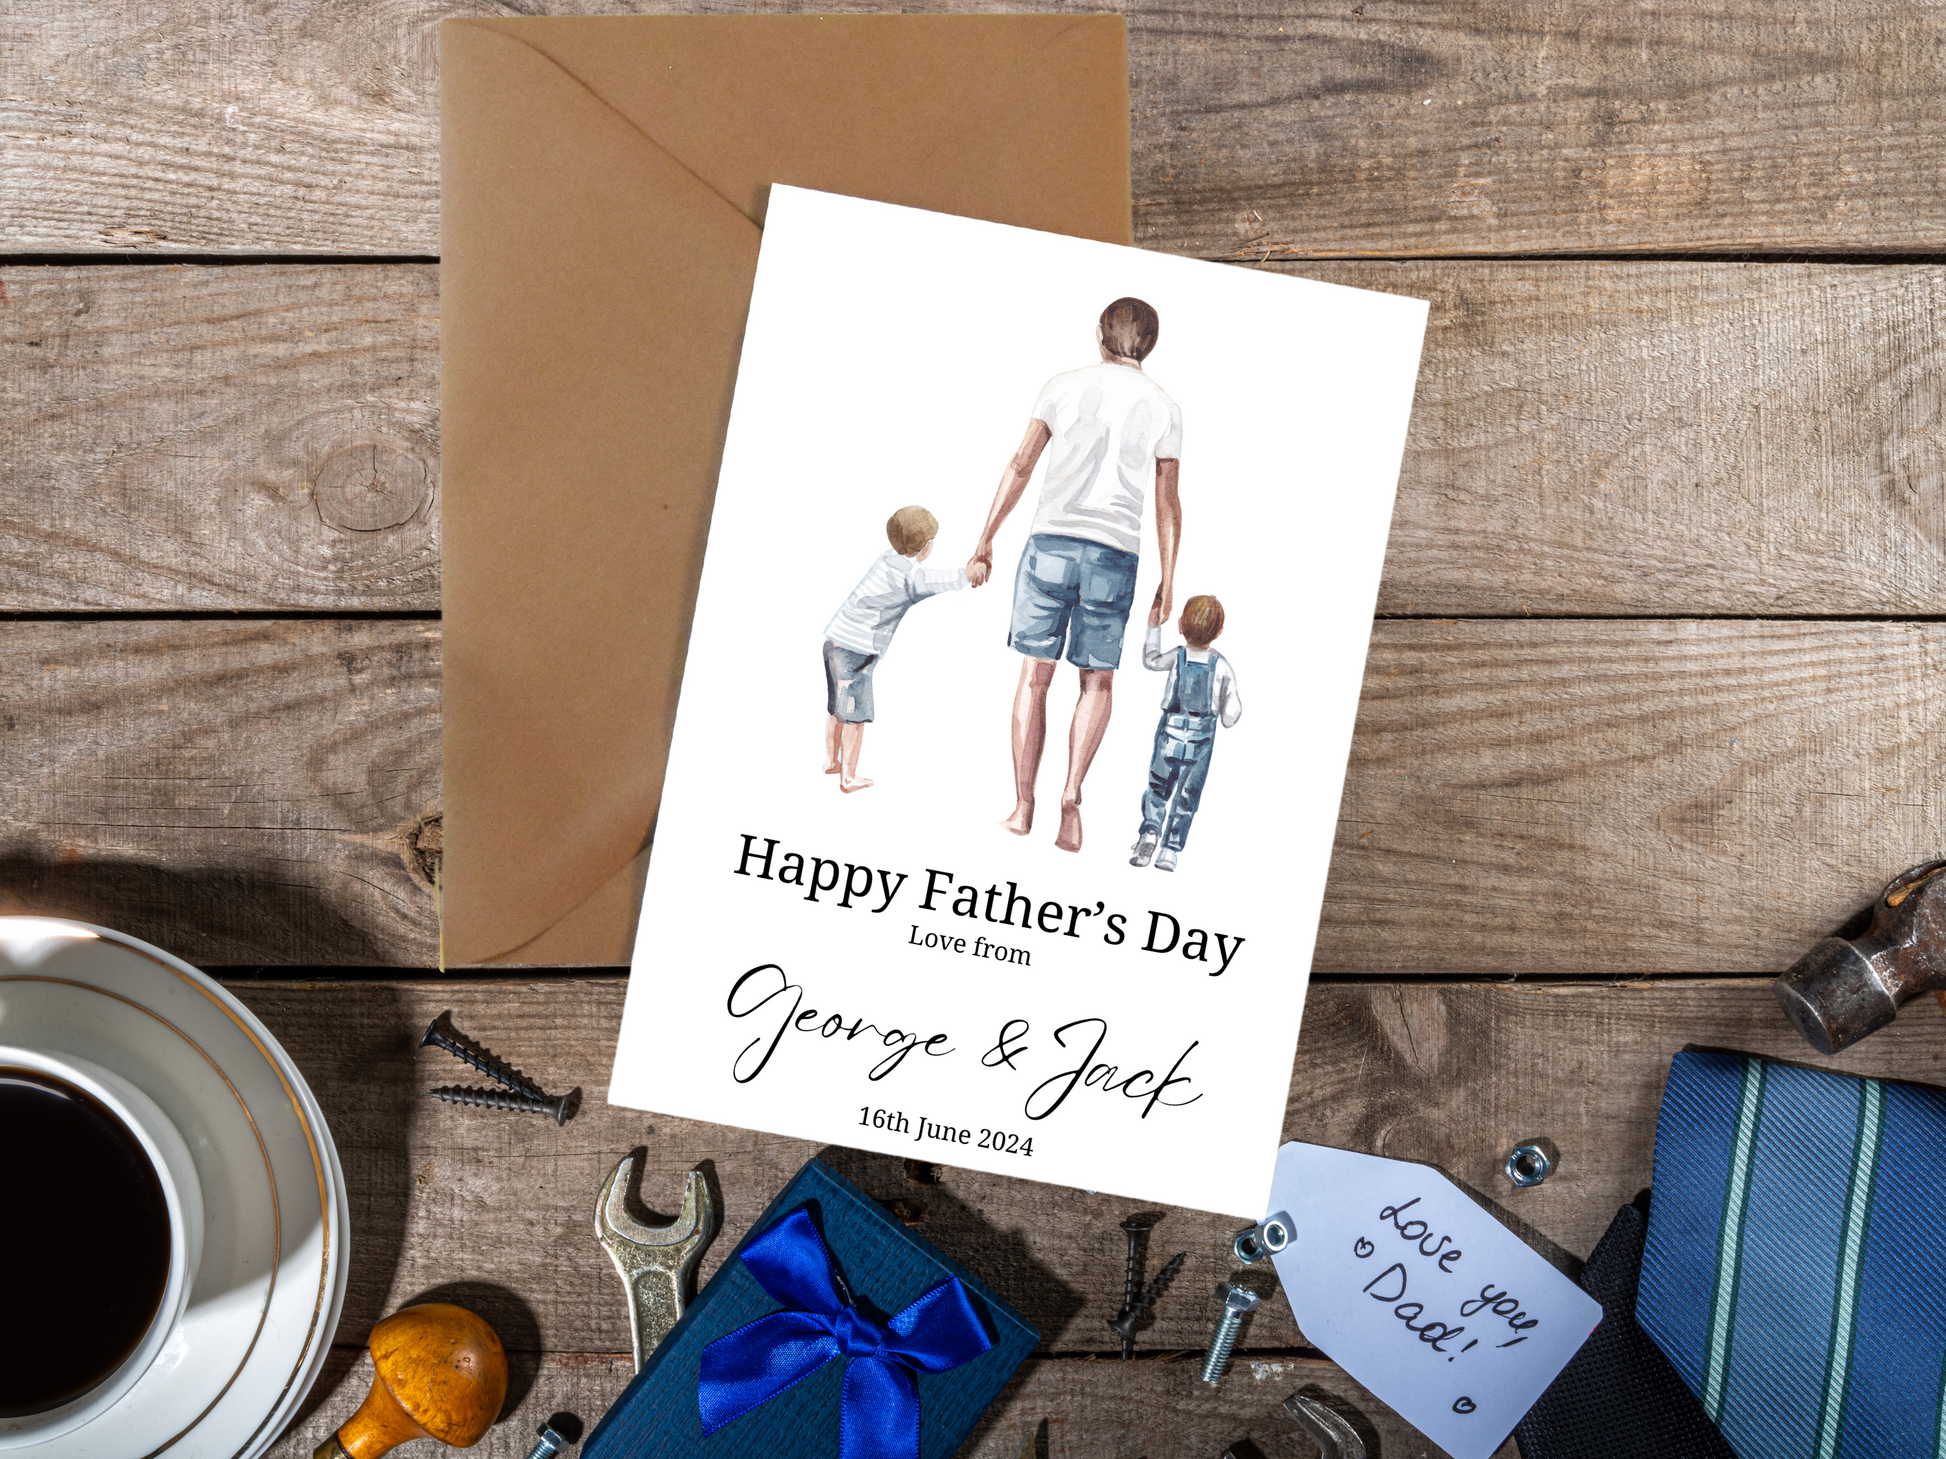 Father's day card with image of dad stood holding hands with two little boys